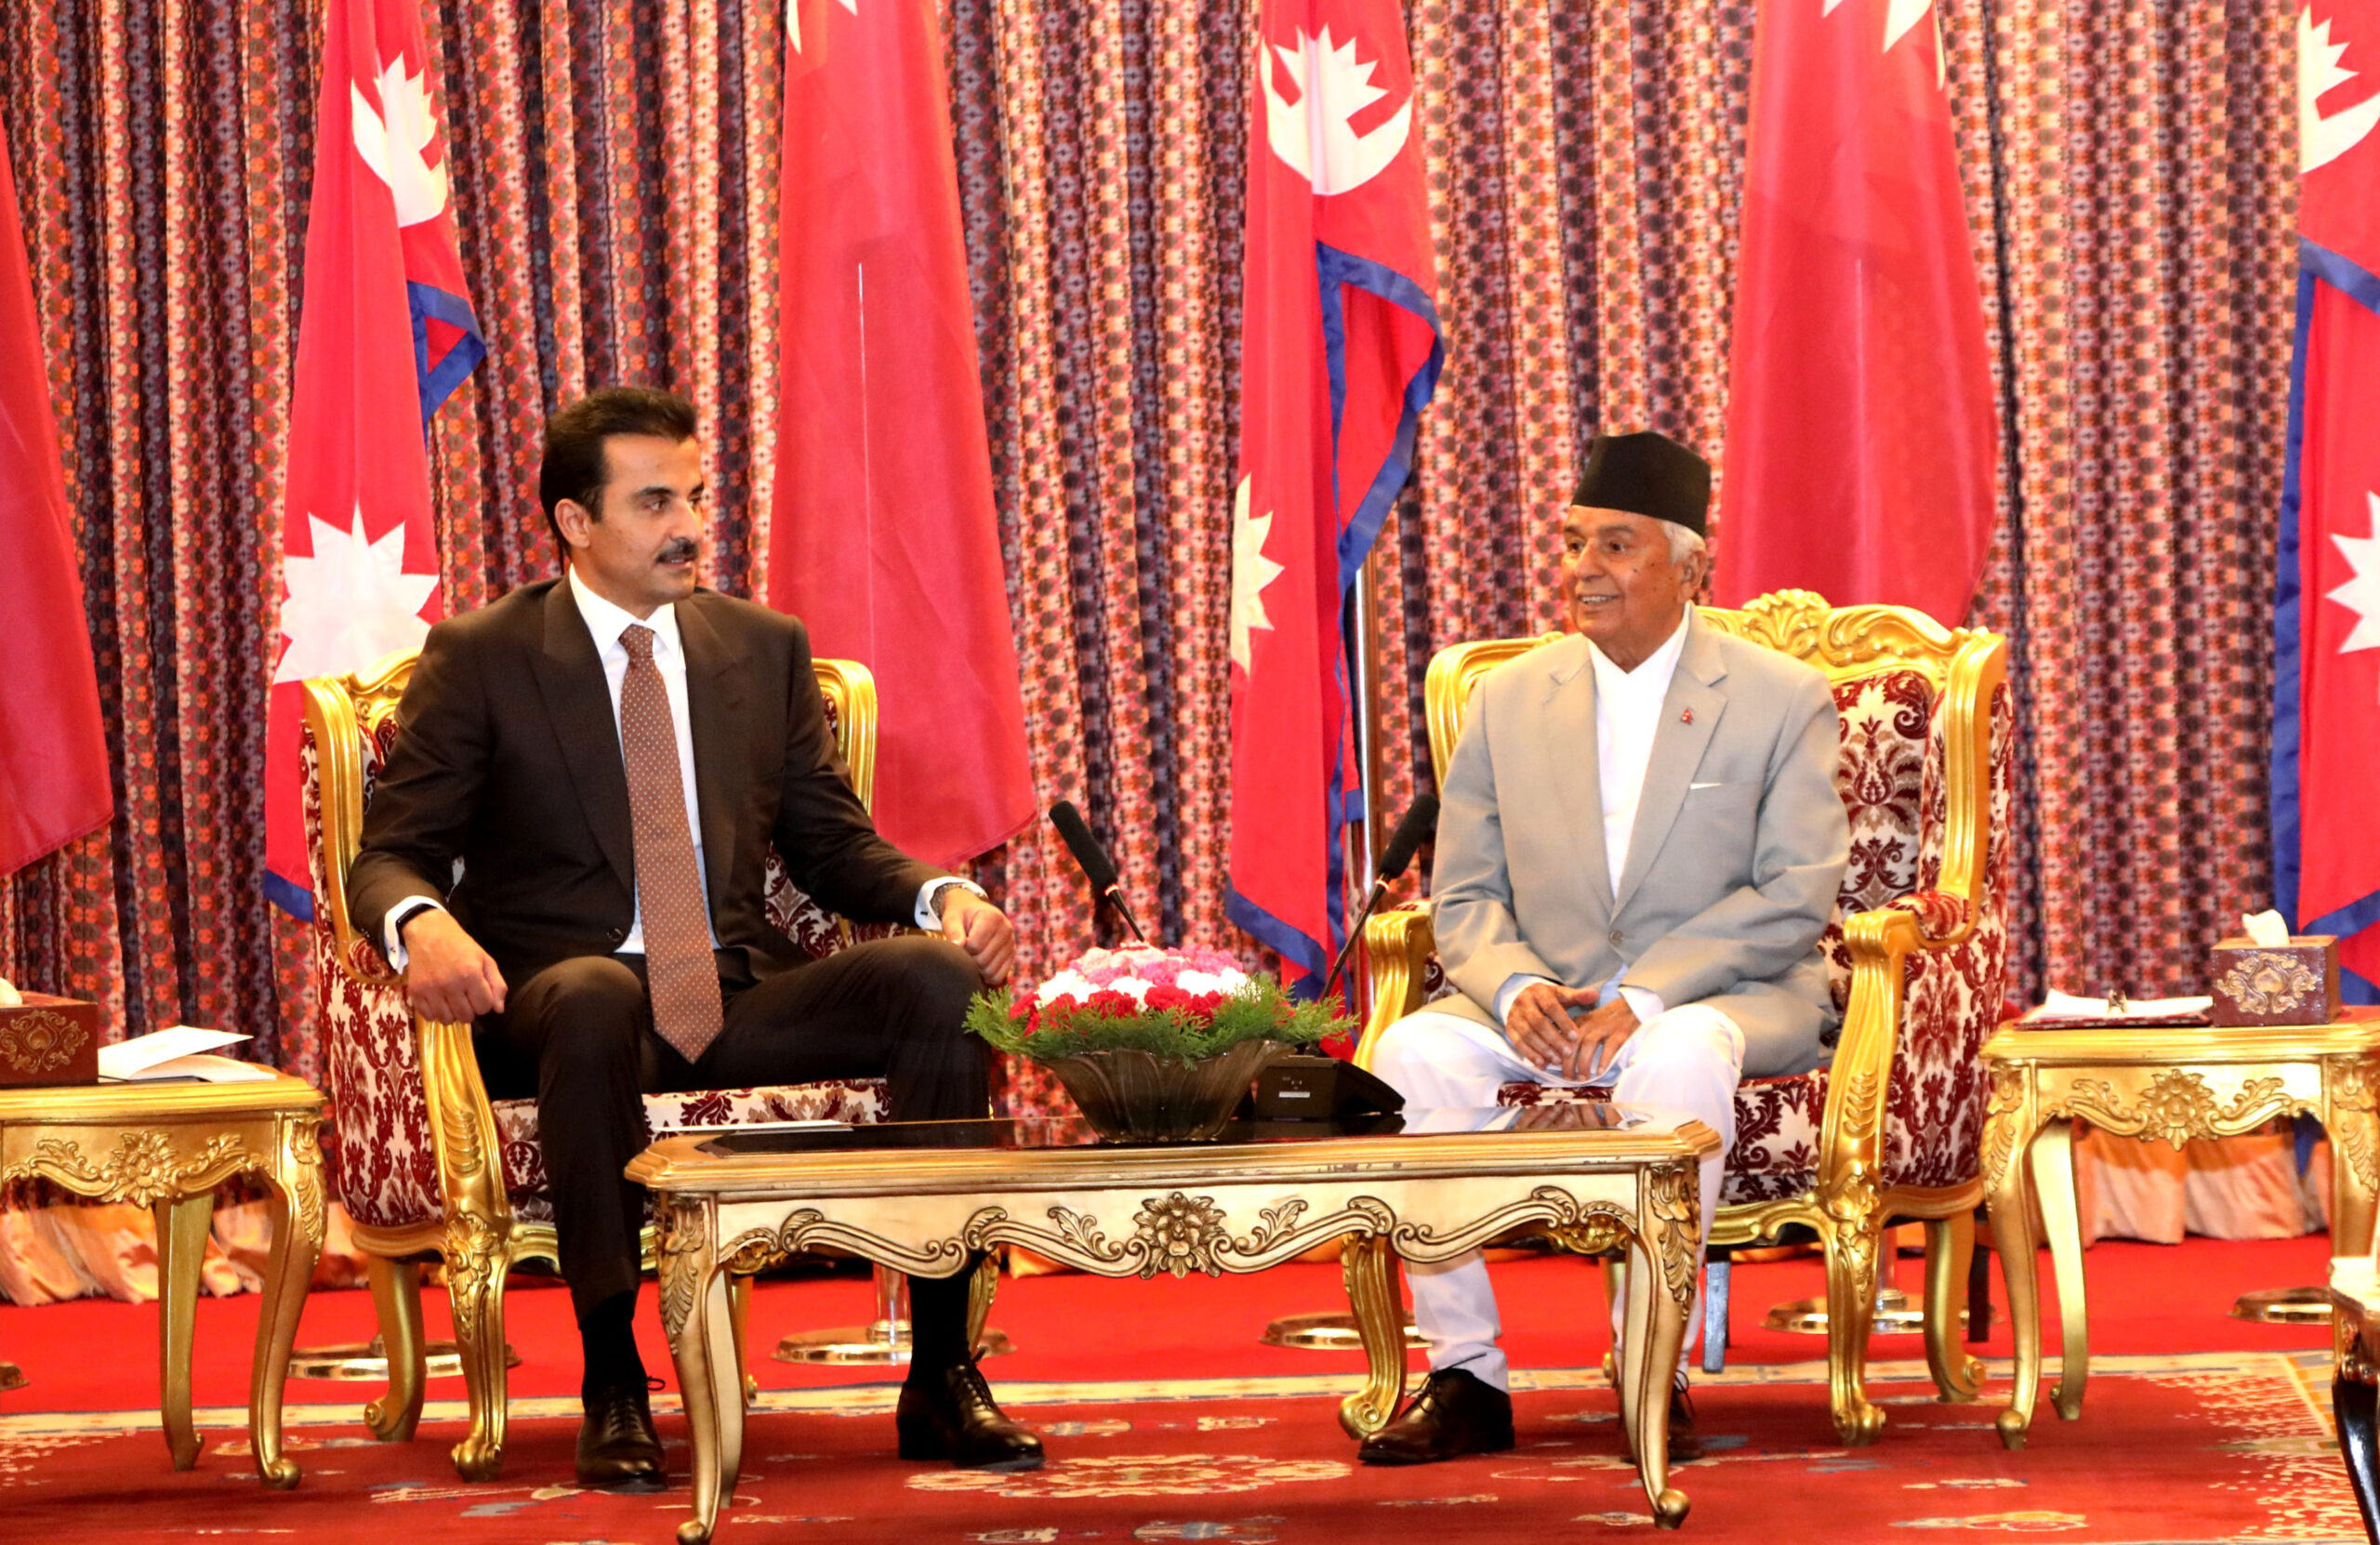 Emir of Qatar and President Paudel hold discussions at Sheetal Niwas